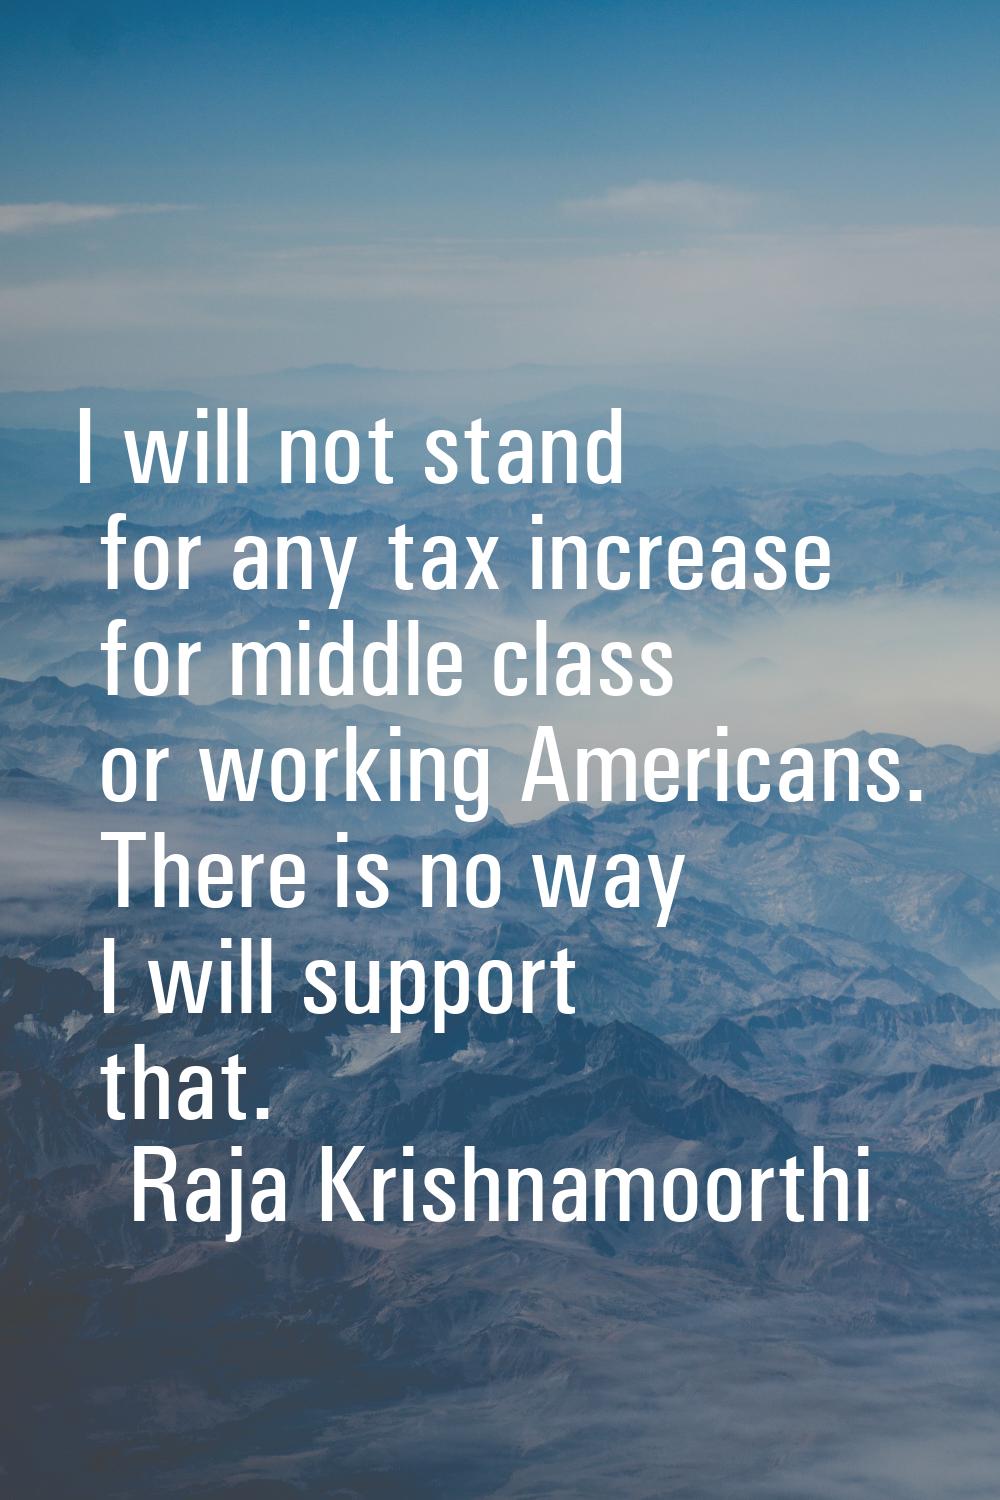 I will not stand for any tax increase for middle class or working Americans. There is no way I will